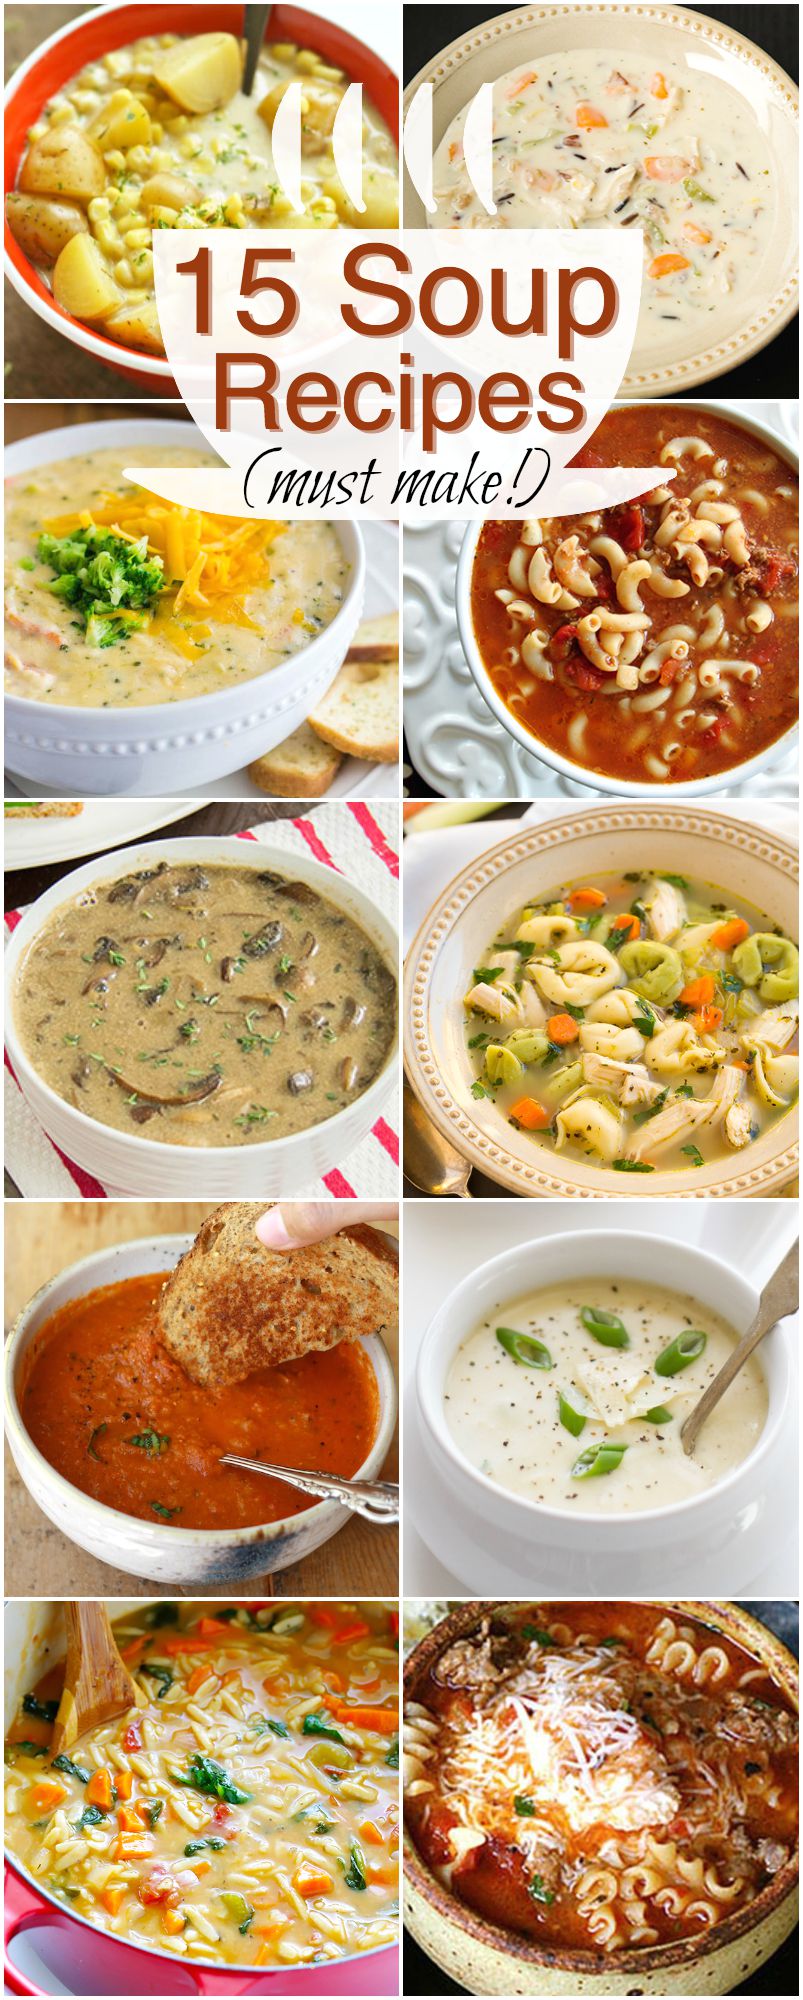 15 Absolutely Delicious Winter Soup Recipes -- pin this one so you don't lose it.